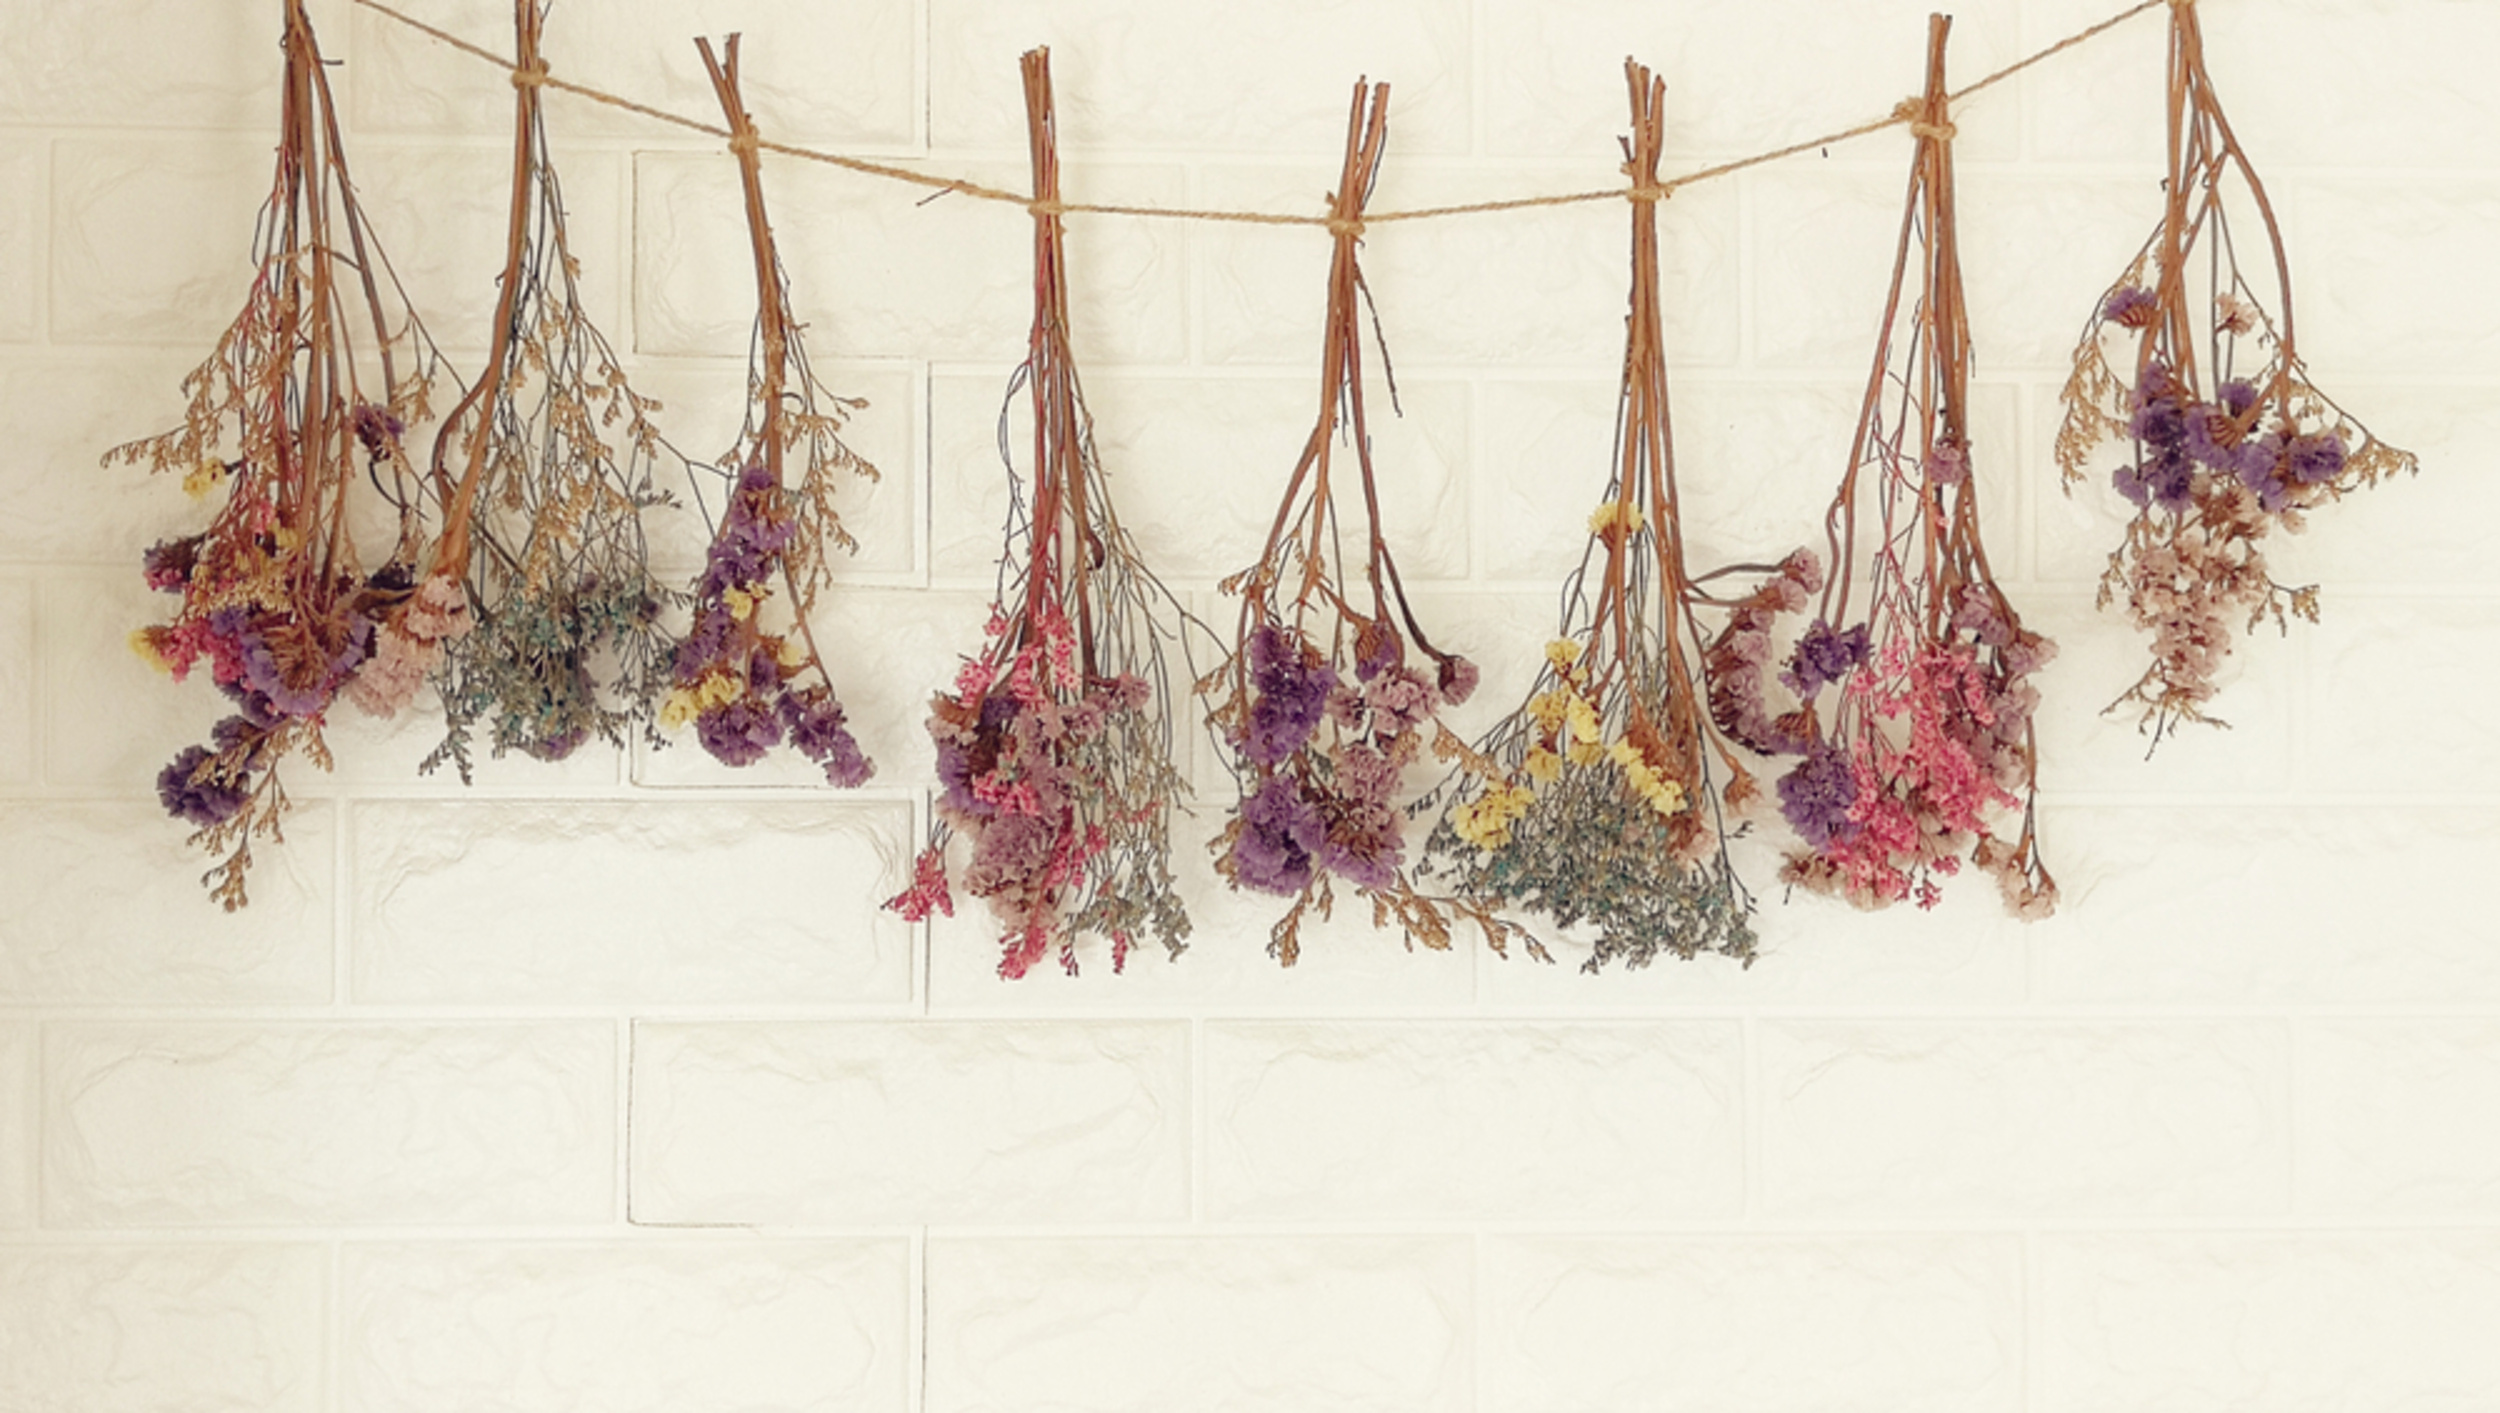 <p>Dried flowers are seriously trendy right now, and they couldn't be easier to make at home. Remove any leaves or foliage from the flowers' stems, then hang to dry in a cool, dark place for a few weeks until the flowers are completely dry. Then, arrange them in a vase for a decorative piece that lasts much longer than fresh flowers. </p><p>You may also like: <a href='https://www.yardbarker.com/lifestyle/articles/20_foods_you_didnt_know_you_can_make_on_the_grill_101823/s1__23860369'>20 foods you didn't know you can make on the grill</a></p>